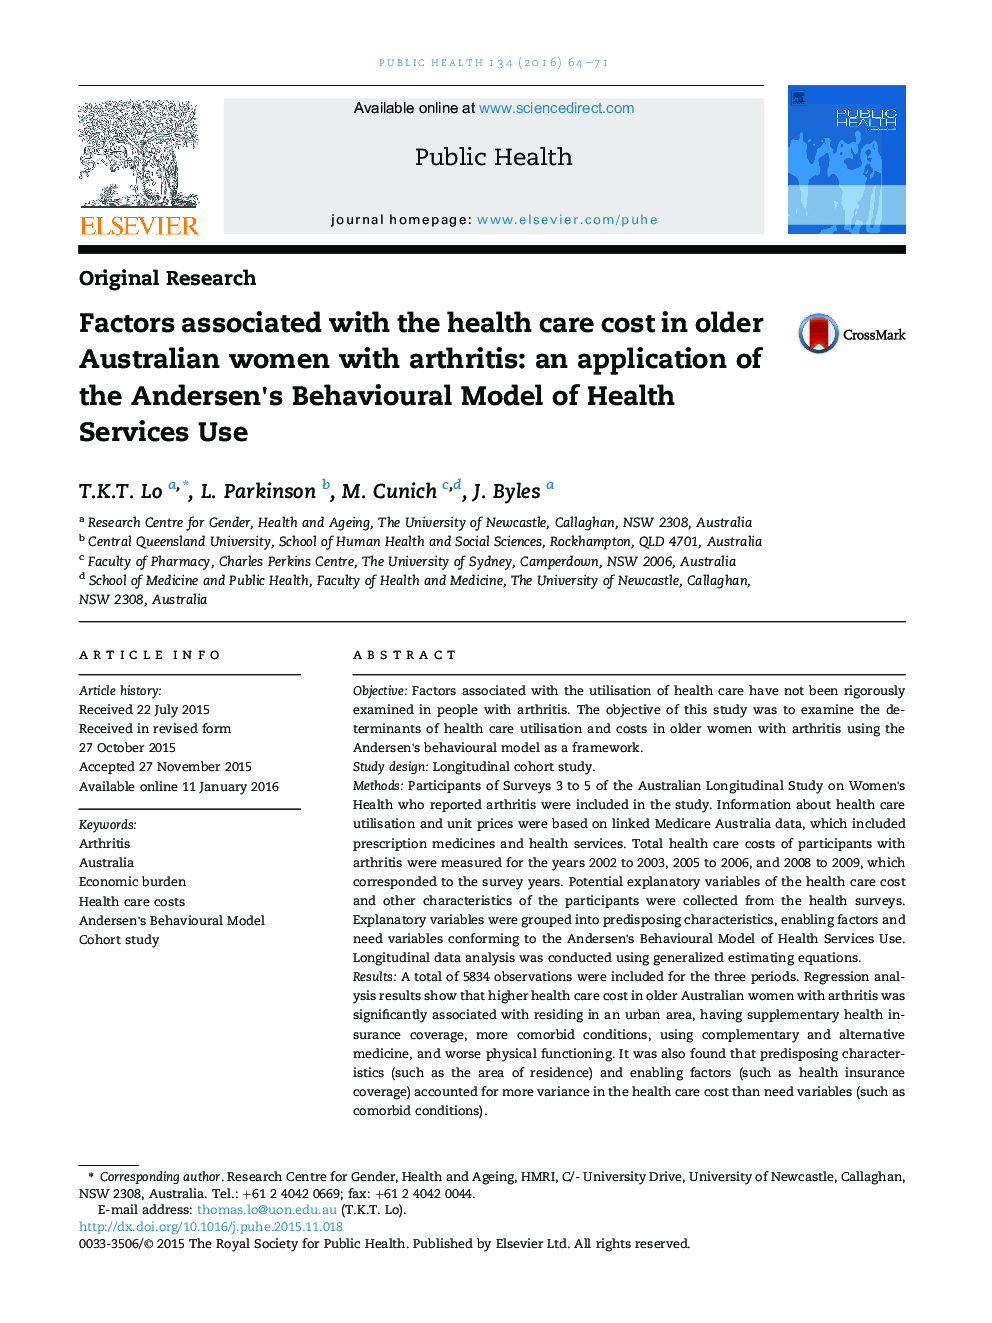 Factors associated with the health care cost in older Australian women with arthritis: an application of the Andersen's Behavioural Model of Health Services Use